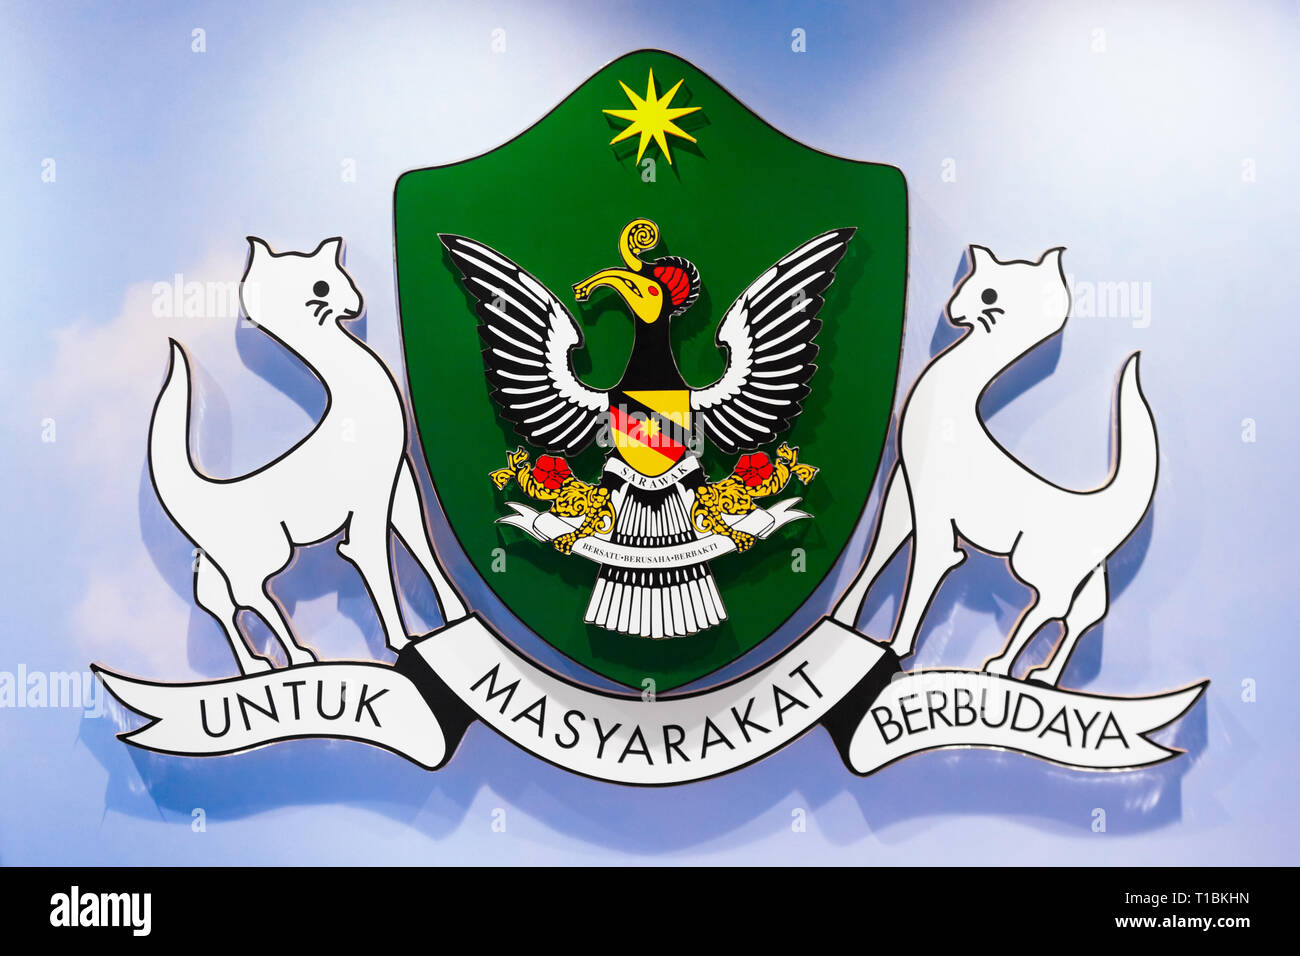 Kota Kuching Utara (North Cat city ) relief coat of arms on wall. This emblem is in public domain. Kuching is popular travel destination on Borneo Stock Photo